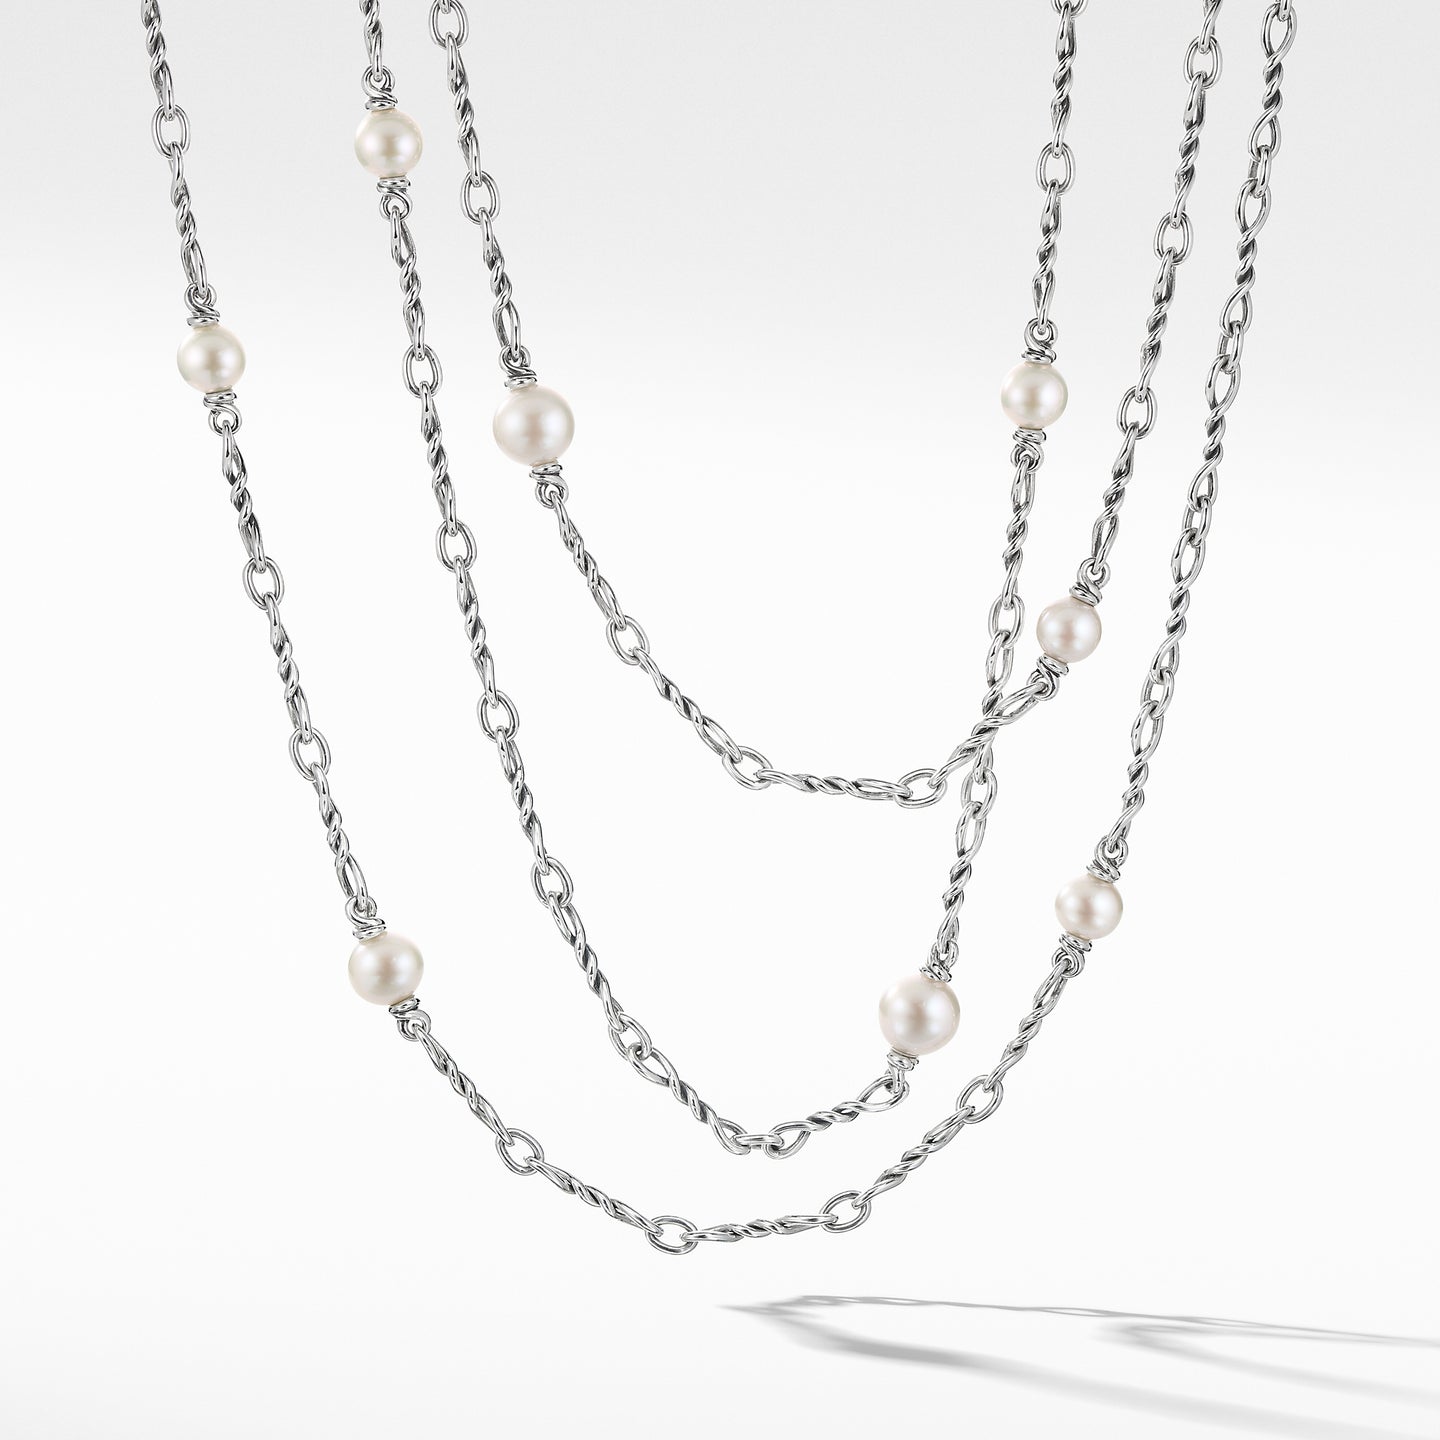 Continuance® Pearl Small Chain Necklace, 72